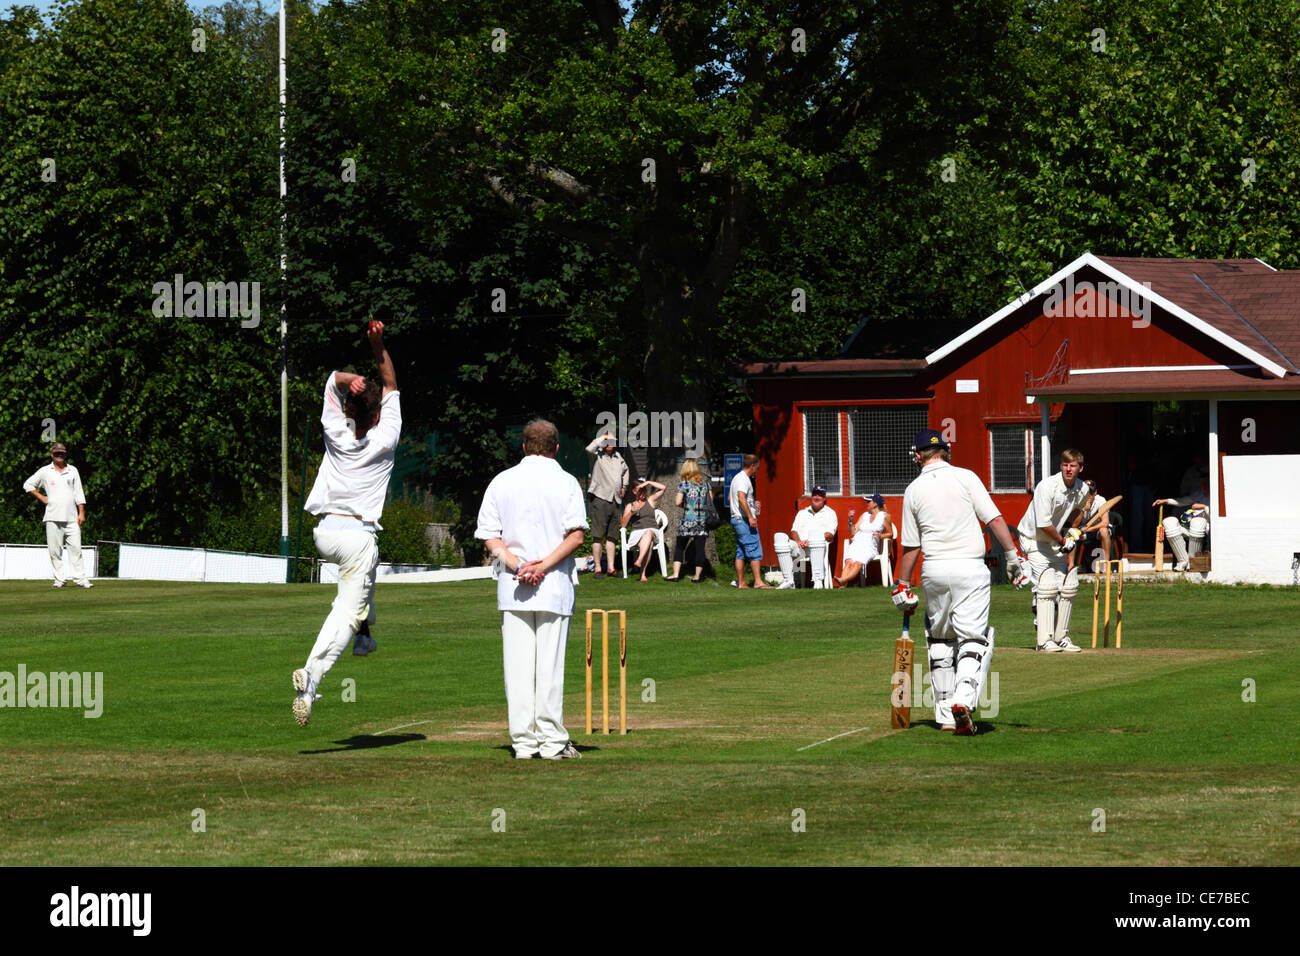 Fast bowler about to bowl during local league cricket match , Southborough Common , near Tunbridge Wells , Kent , England Stock Photo